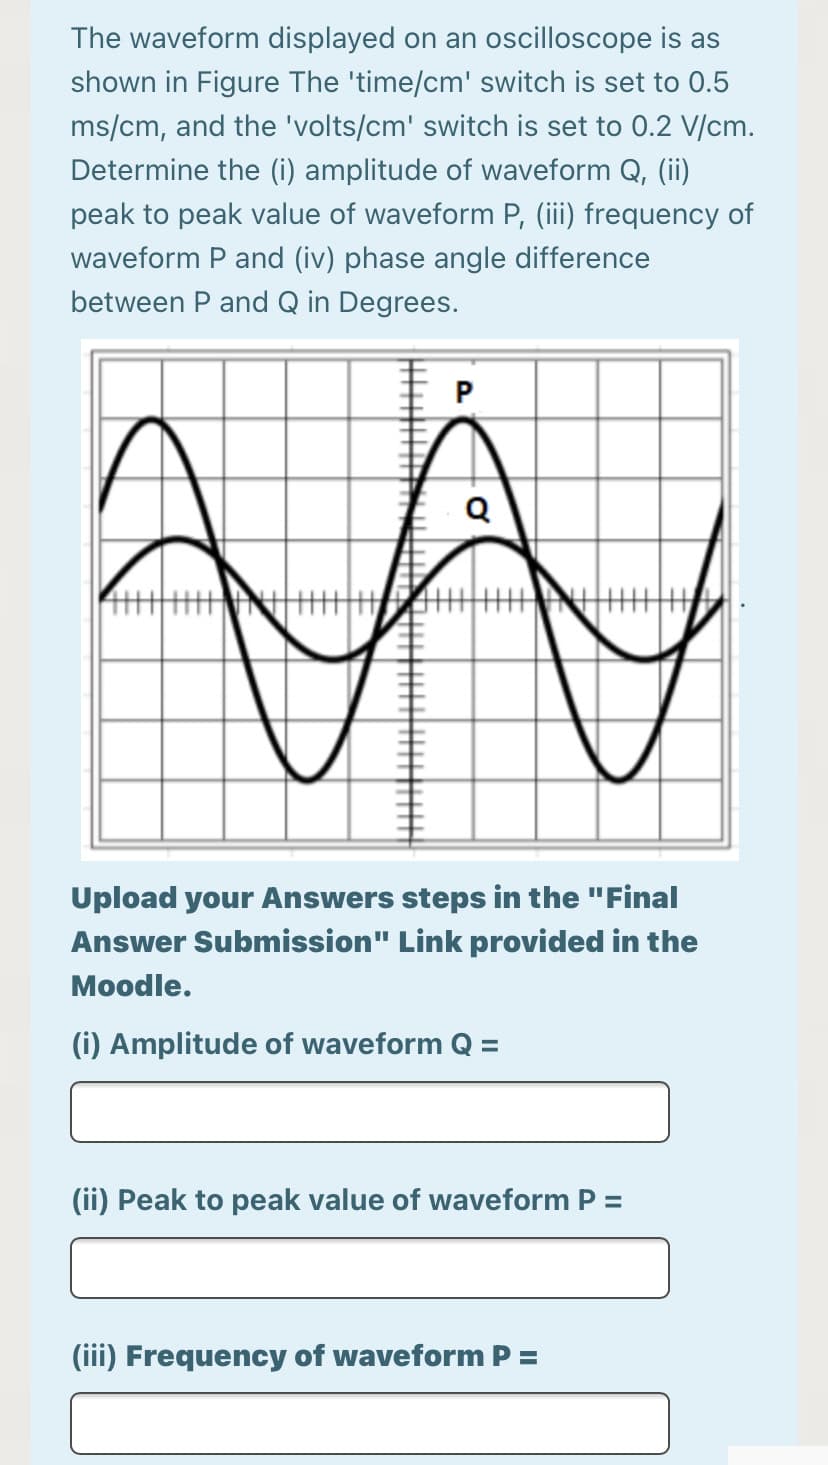 The waveform displayed on an oscilloscope is as
shown in Figure The 'time/cm' switch is set to 0.5
ms/cm, and the 'volts/cm' switch is set to 0.2 V/cm.
Determine the (i) amplitude of waveform Q, (ii)
peak to peak value of waveform P, (iii) frequency of
waveform P and (iv) phase angle difference
between P and Q in Degrees.
Upload your Answers steps in the "Final
Answer Submission" Link provided in the
Moodle.
(i) Amplitude of waveform Q =
(ii) Peak to peak value of waveform P =
(iii) Frequency of waveform P =
